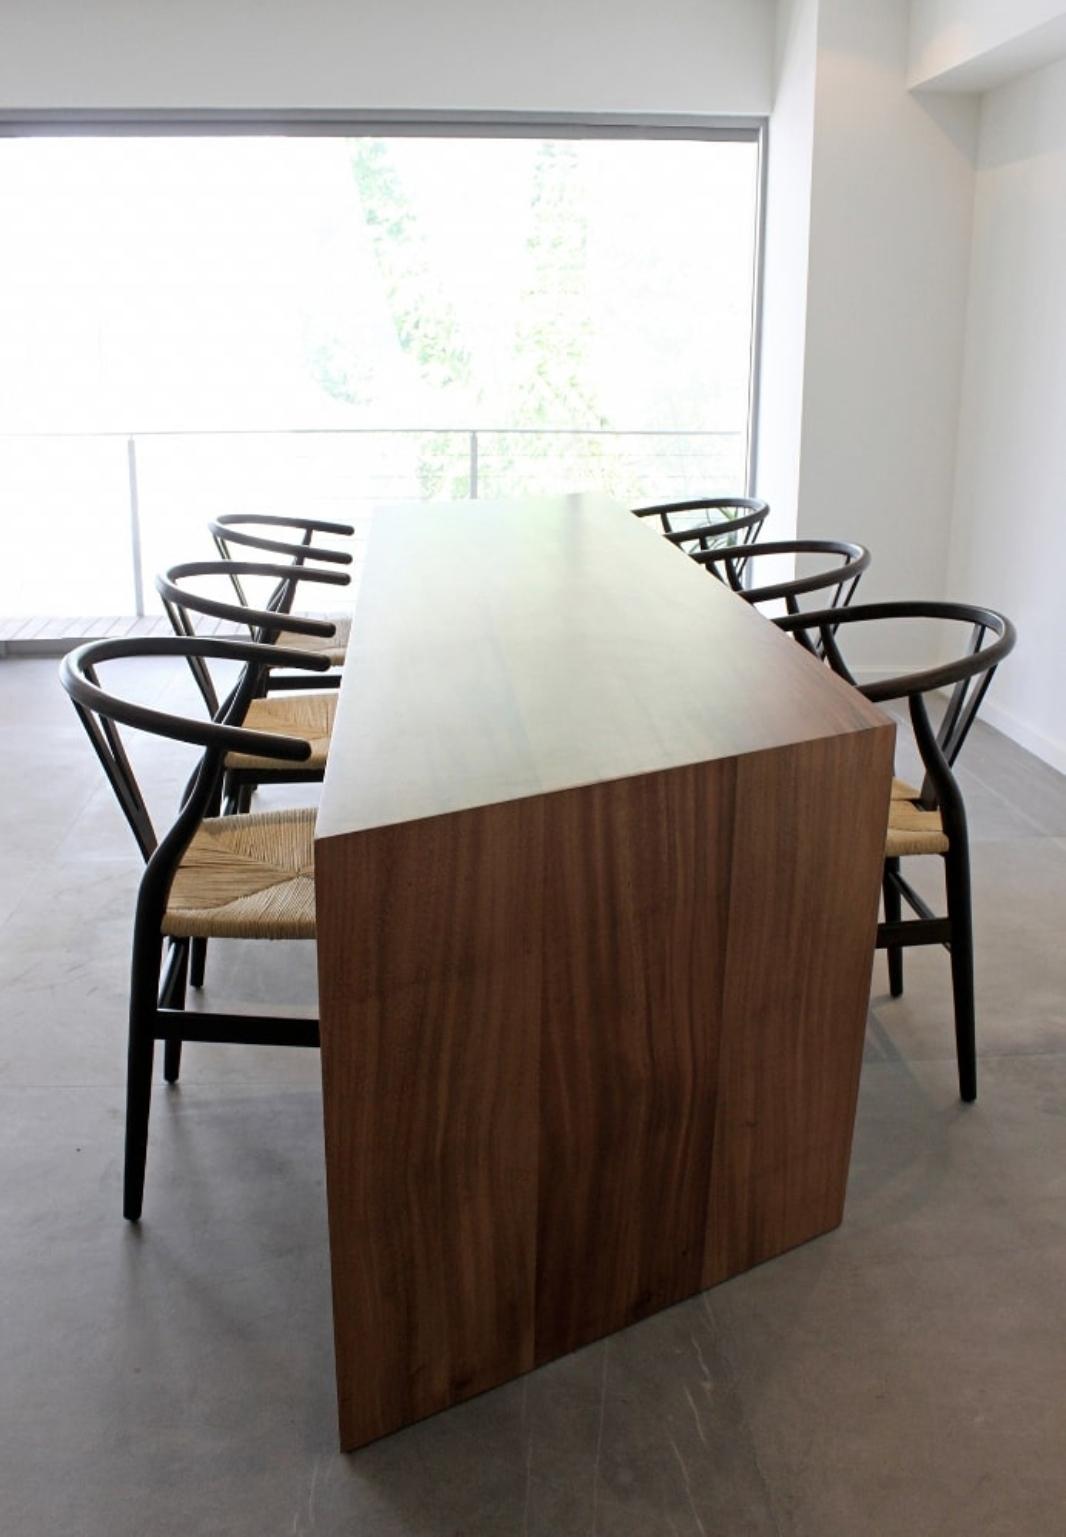 La Desviada Tall Table and Desk by Maria Beckmann, Represented by Tuleste Factor 3